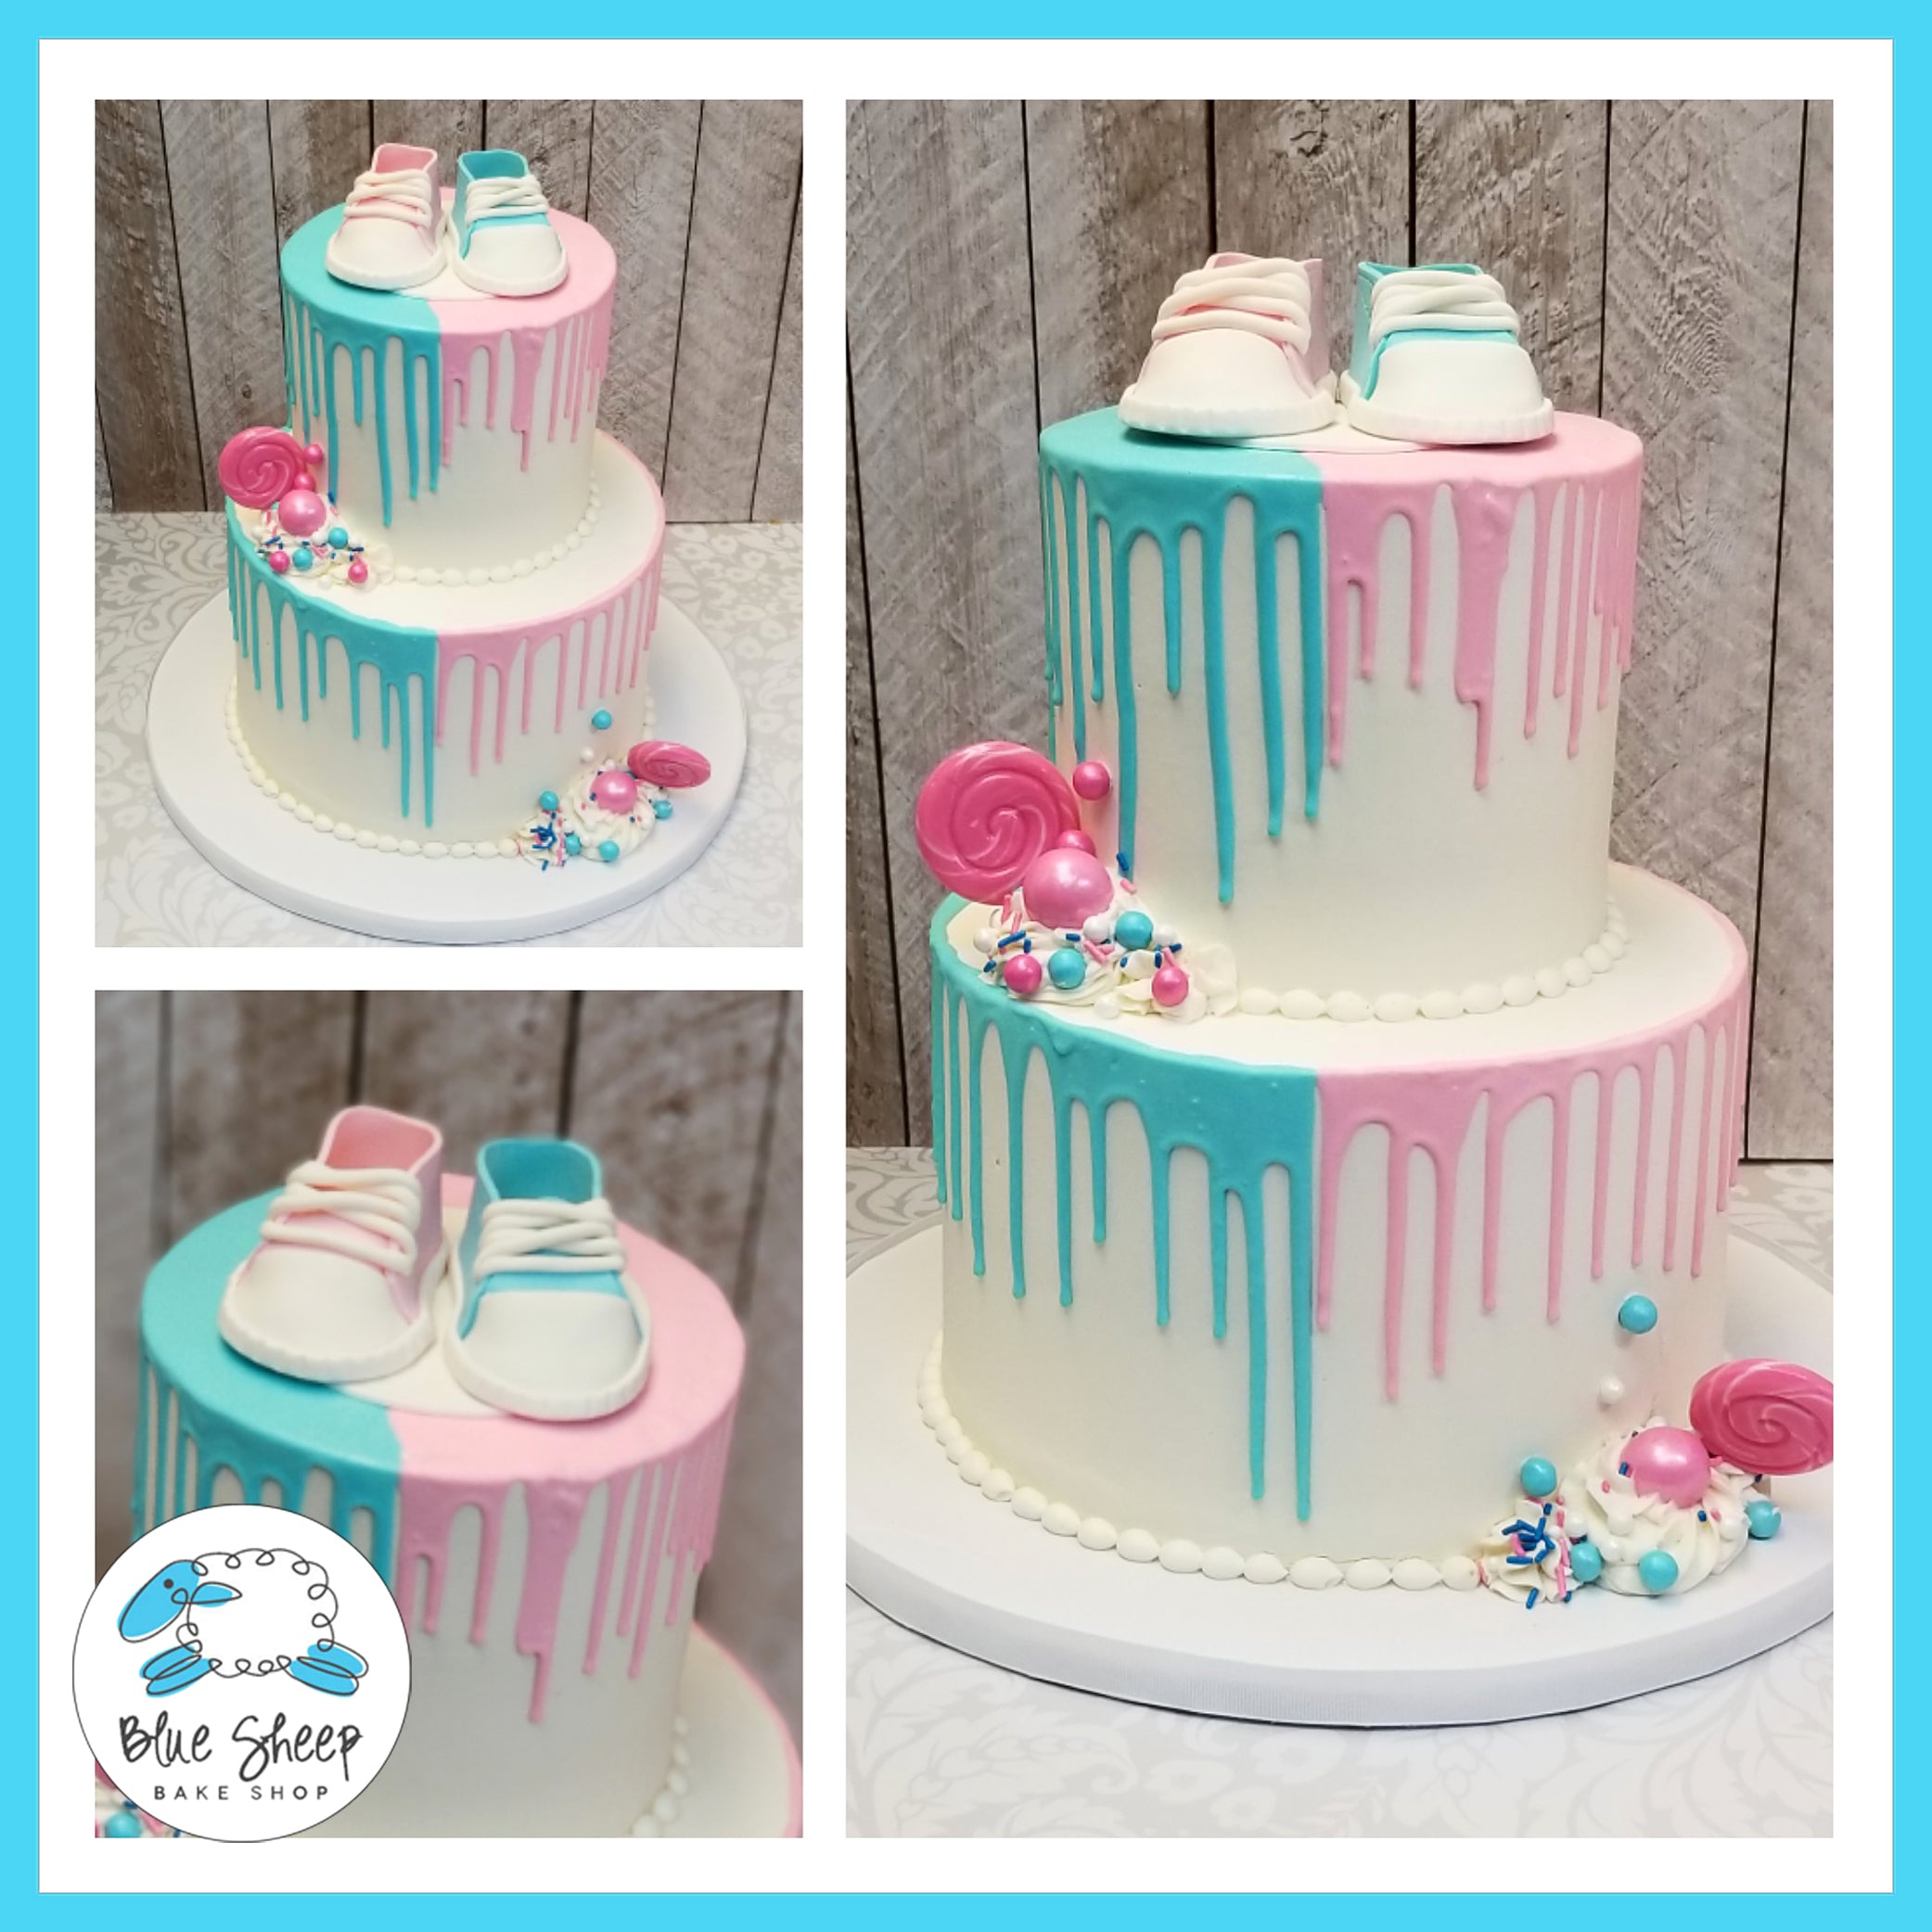 Super Pink and Blue Baby Shower Cake with Baby Sneakers NJ – Blue Sheep UE-31